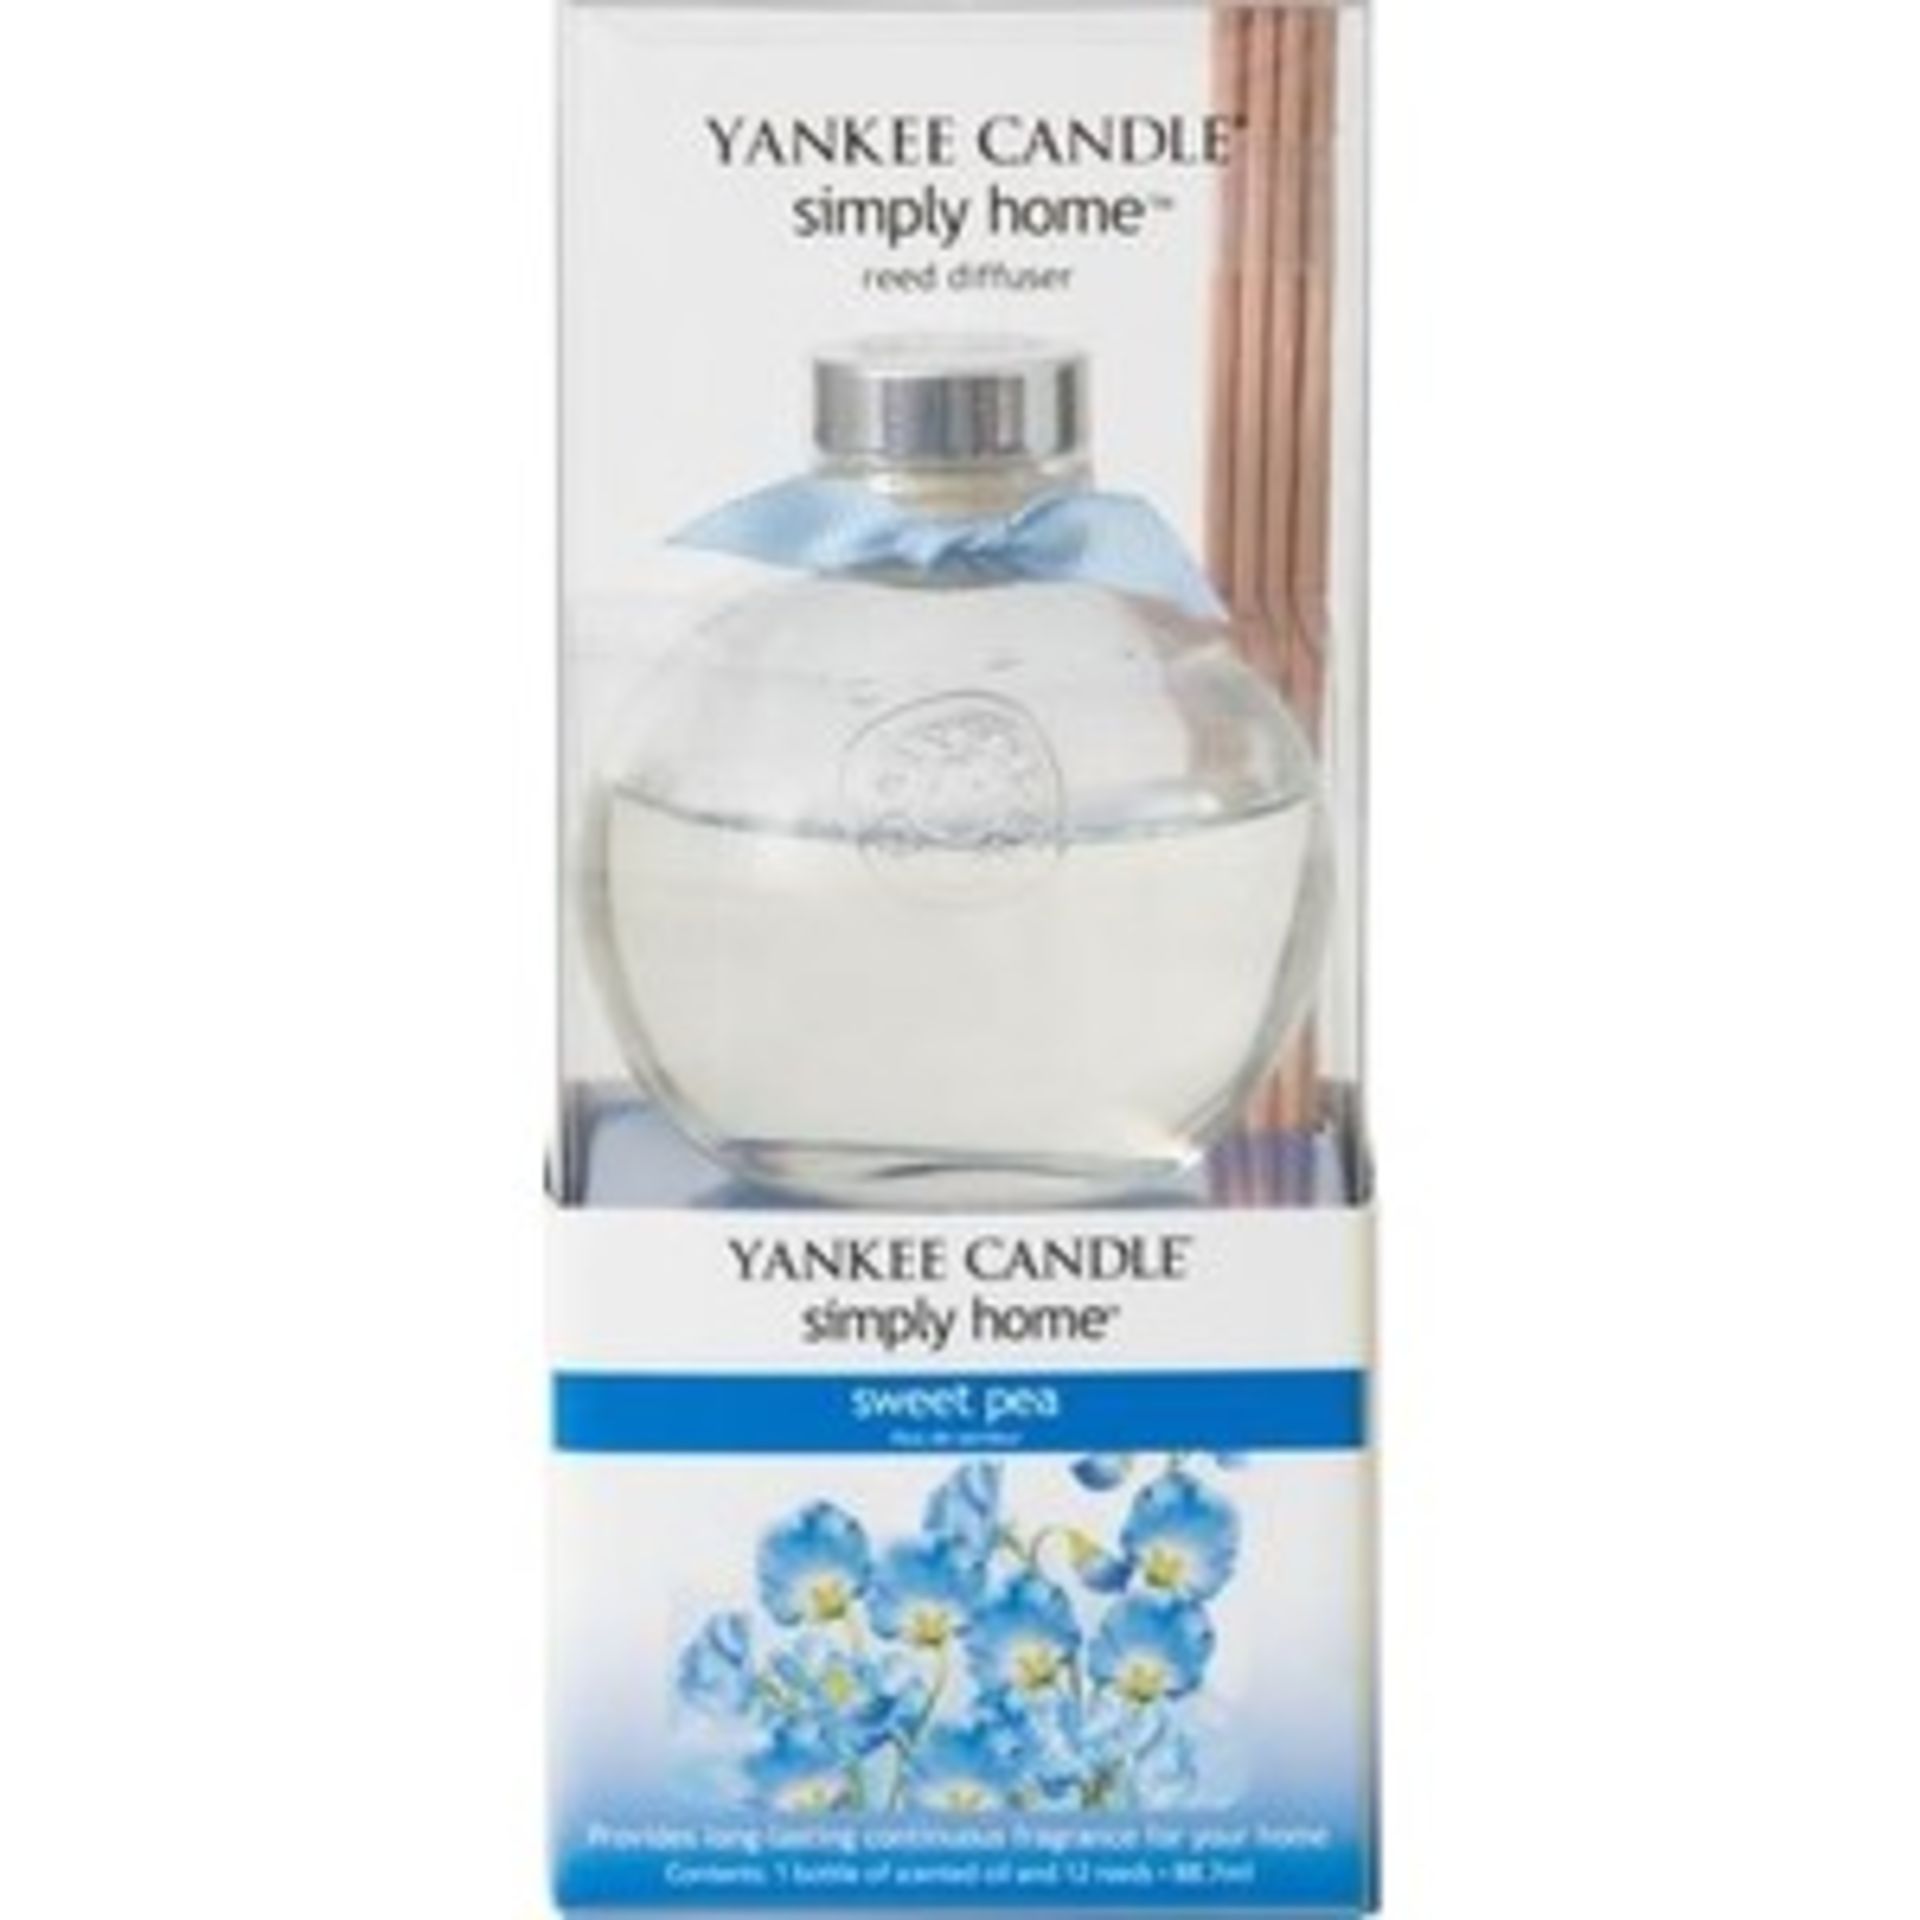 V *TRADE QTY* Brand New Yankee Candle Reed Diffuser Sweet Pea Amazon Price £11.87 X 3 YOUR BID PRICE